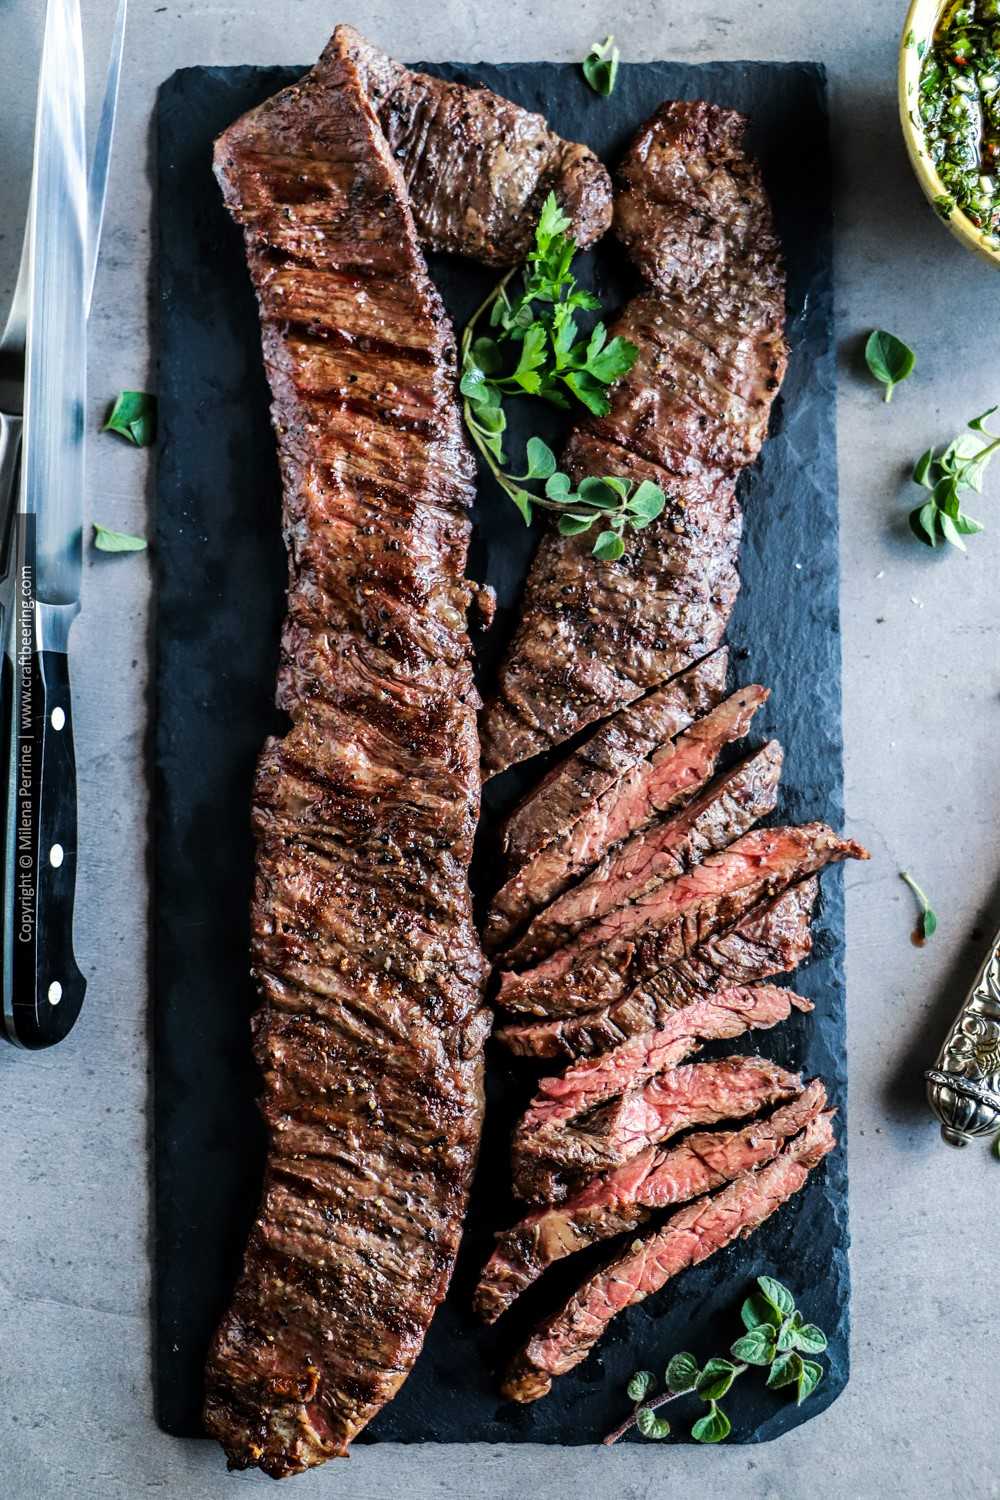 Grilled outside skirt steak with chimichurri in the style of Argentinian entrana a la parilla